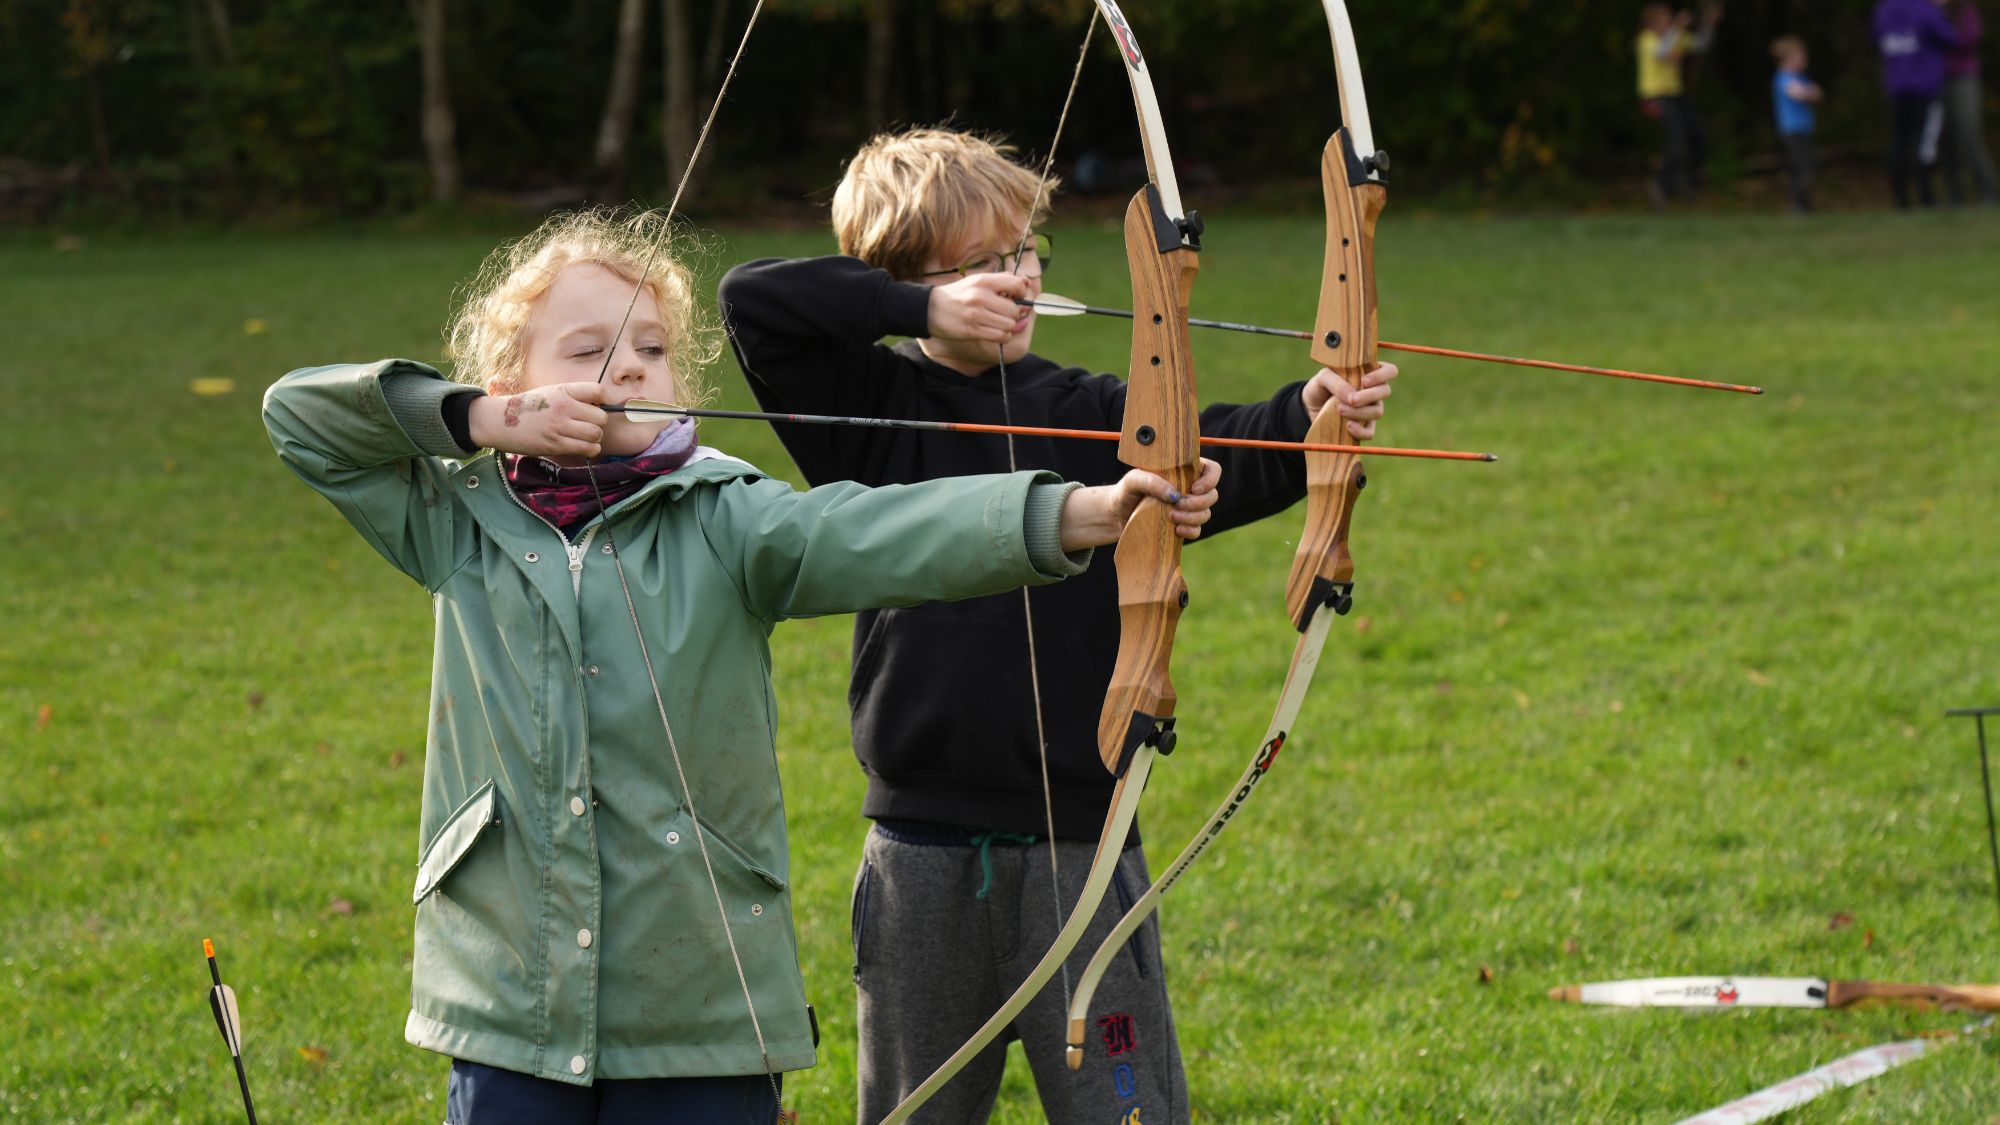 A boy and a girl taking part in an archery lesson.